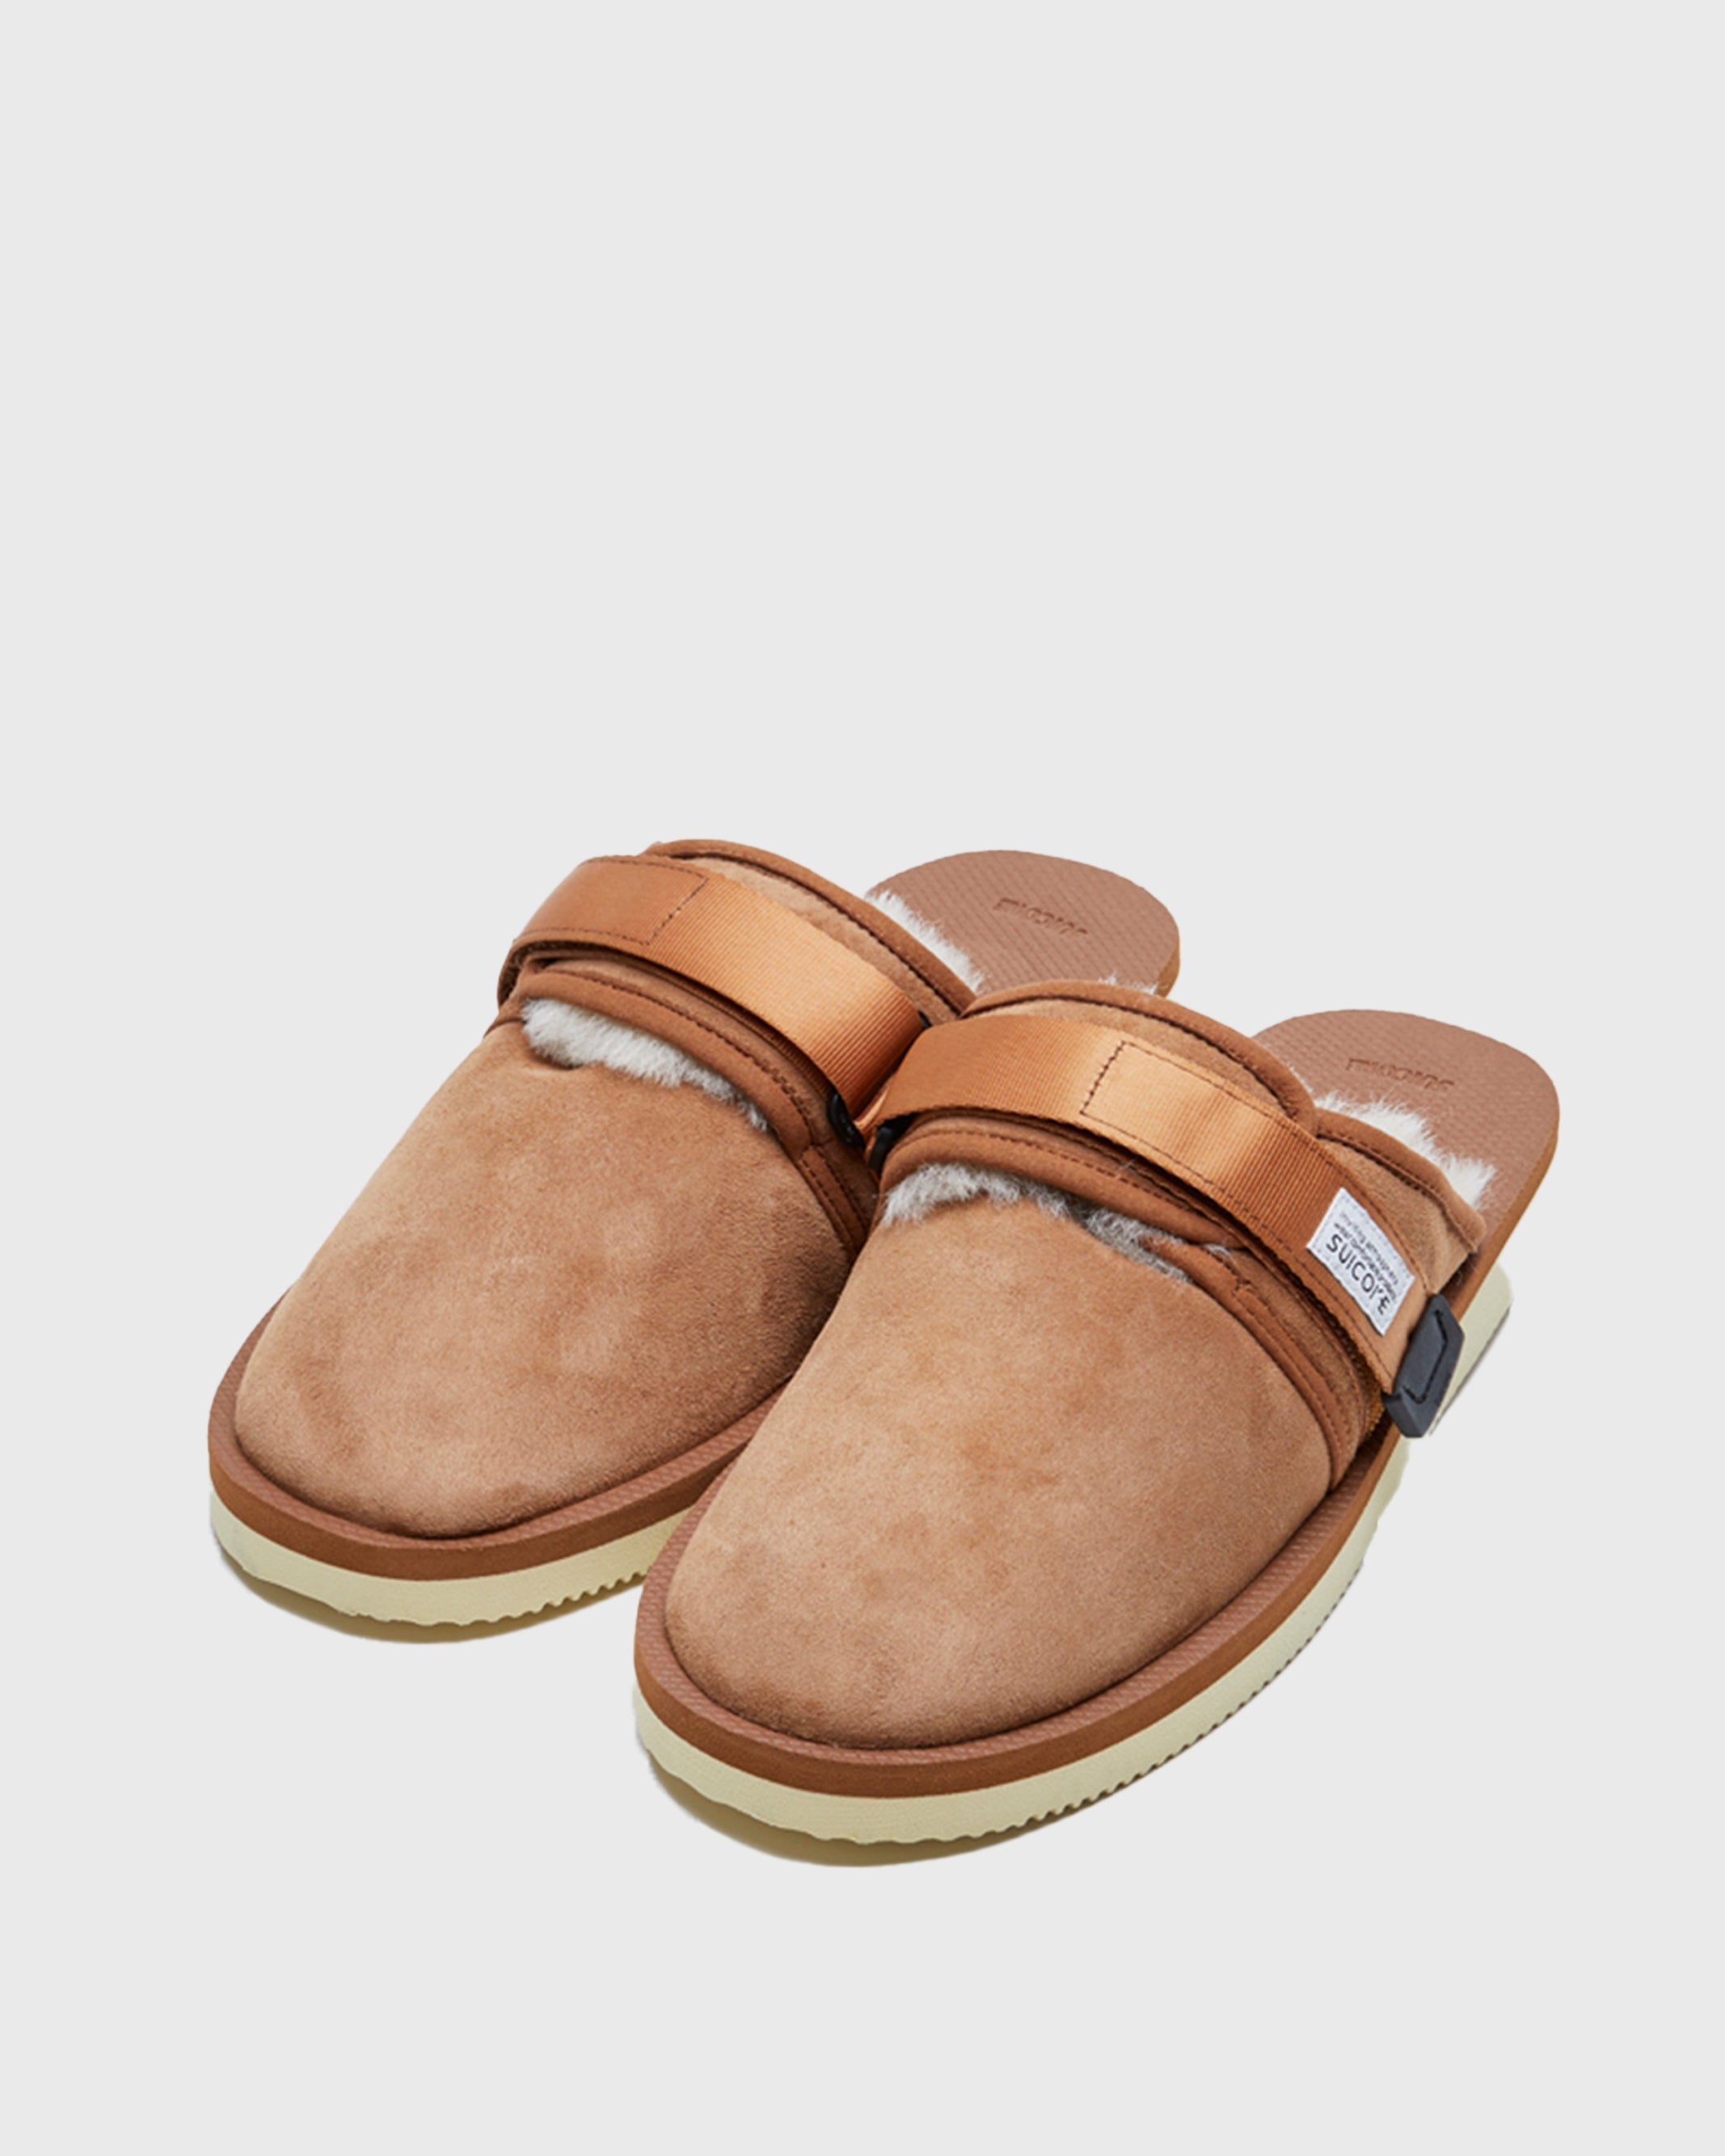 SUICOKE ZAVO-M2ab in Brown OG-072M2AB | Shop from eightywingold an official brand partner for SUICOKE Canada and US.